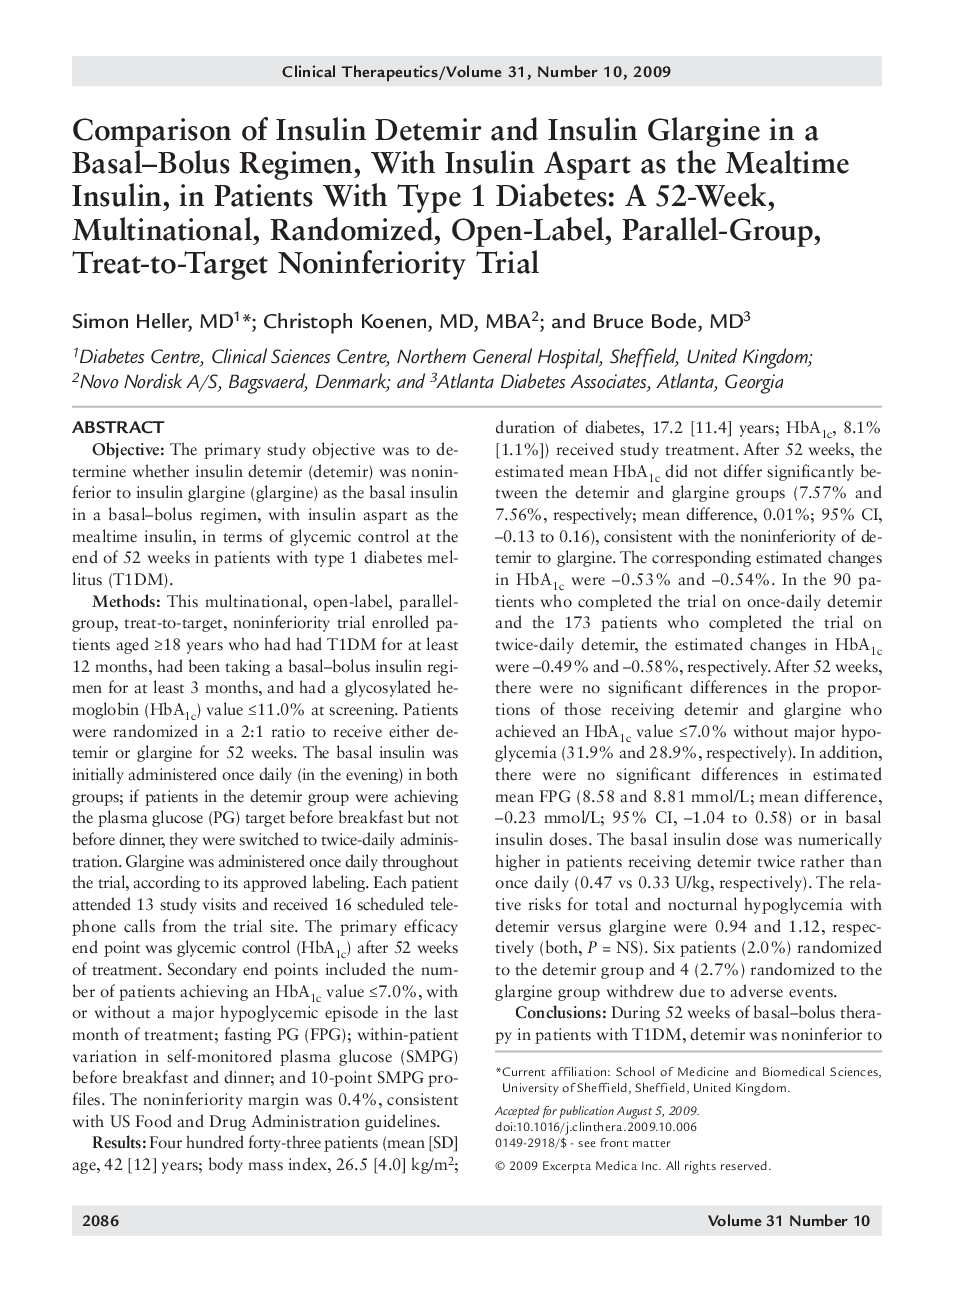 Comparison of insulin detemir and insulin glargine in a basal—bolus regimen, with insulin aspart as the mealtime insulin, in patients with type 1 diabetes: A 52-week, multinational, randomized, open-label, parallel-group, Treat-to-Target noninferiority tr